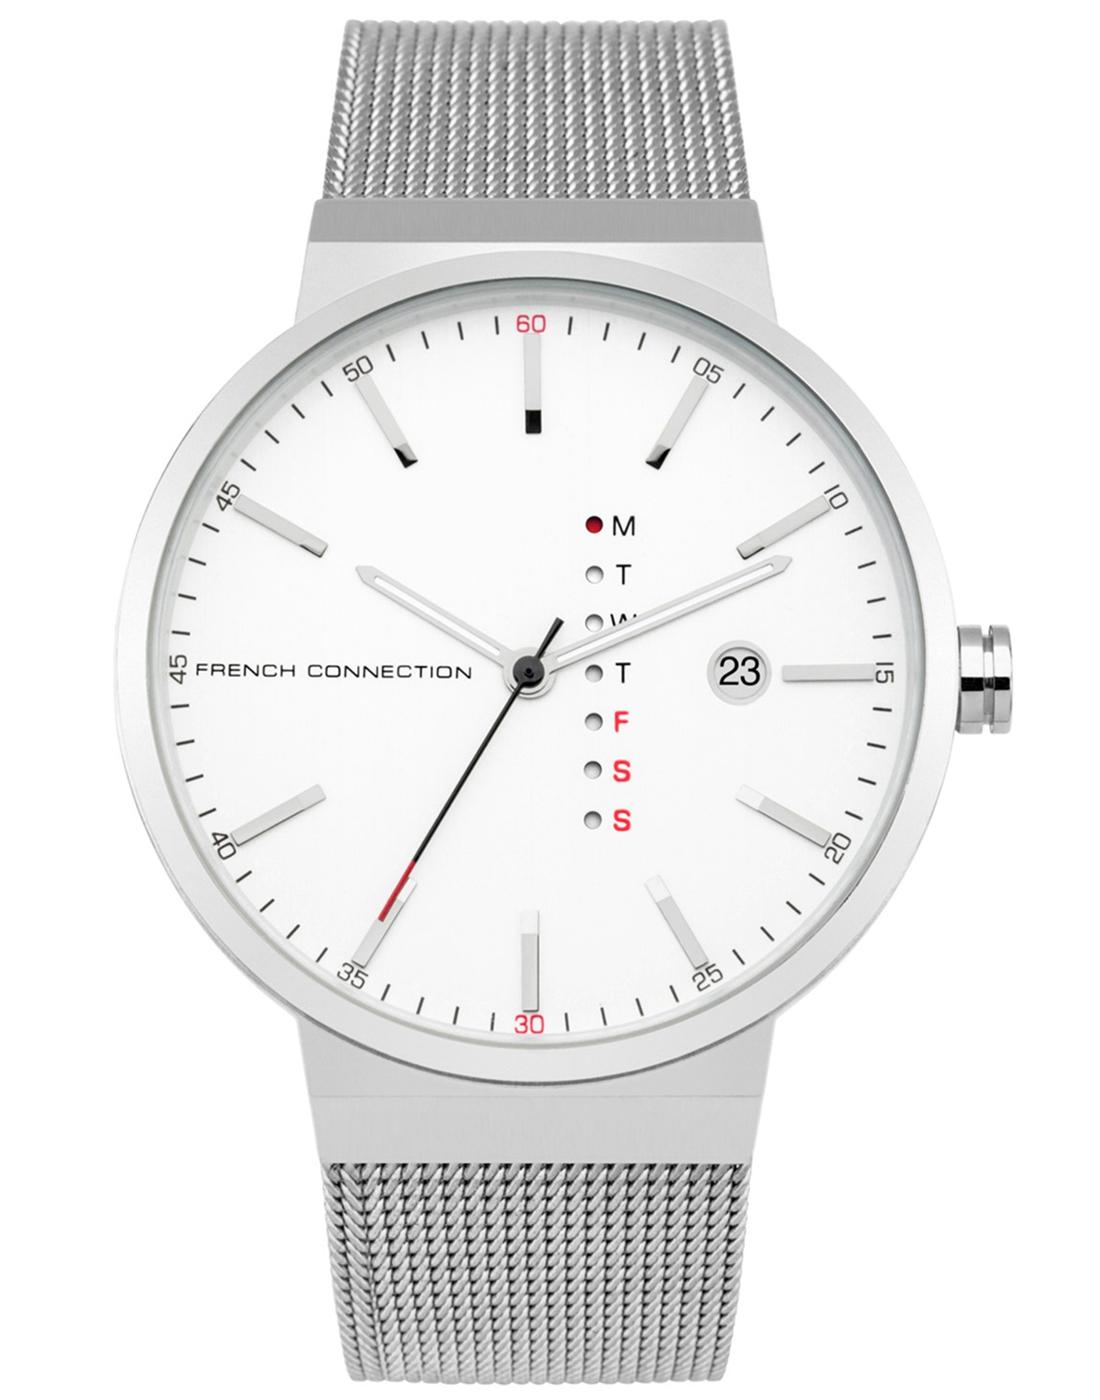 FRENCH CONNECTION Retro Silver Mesh Strap Watch